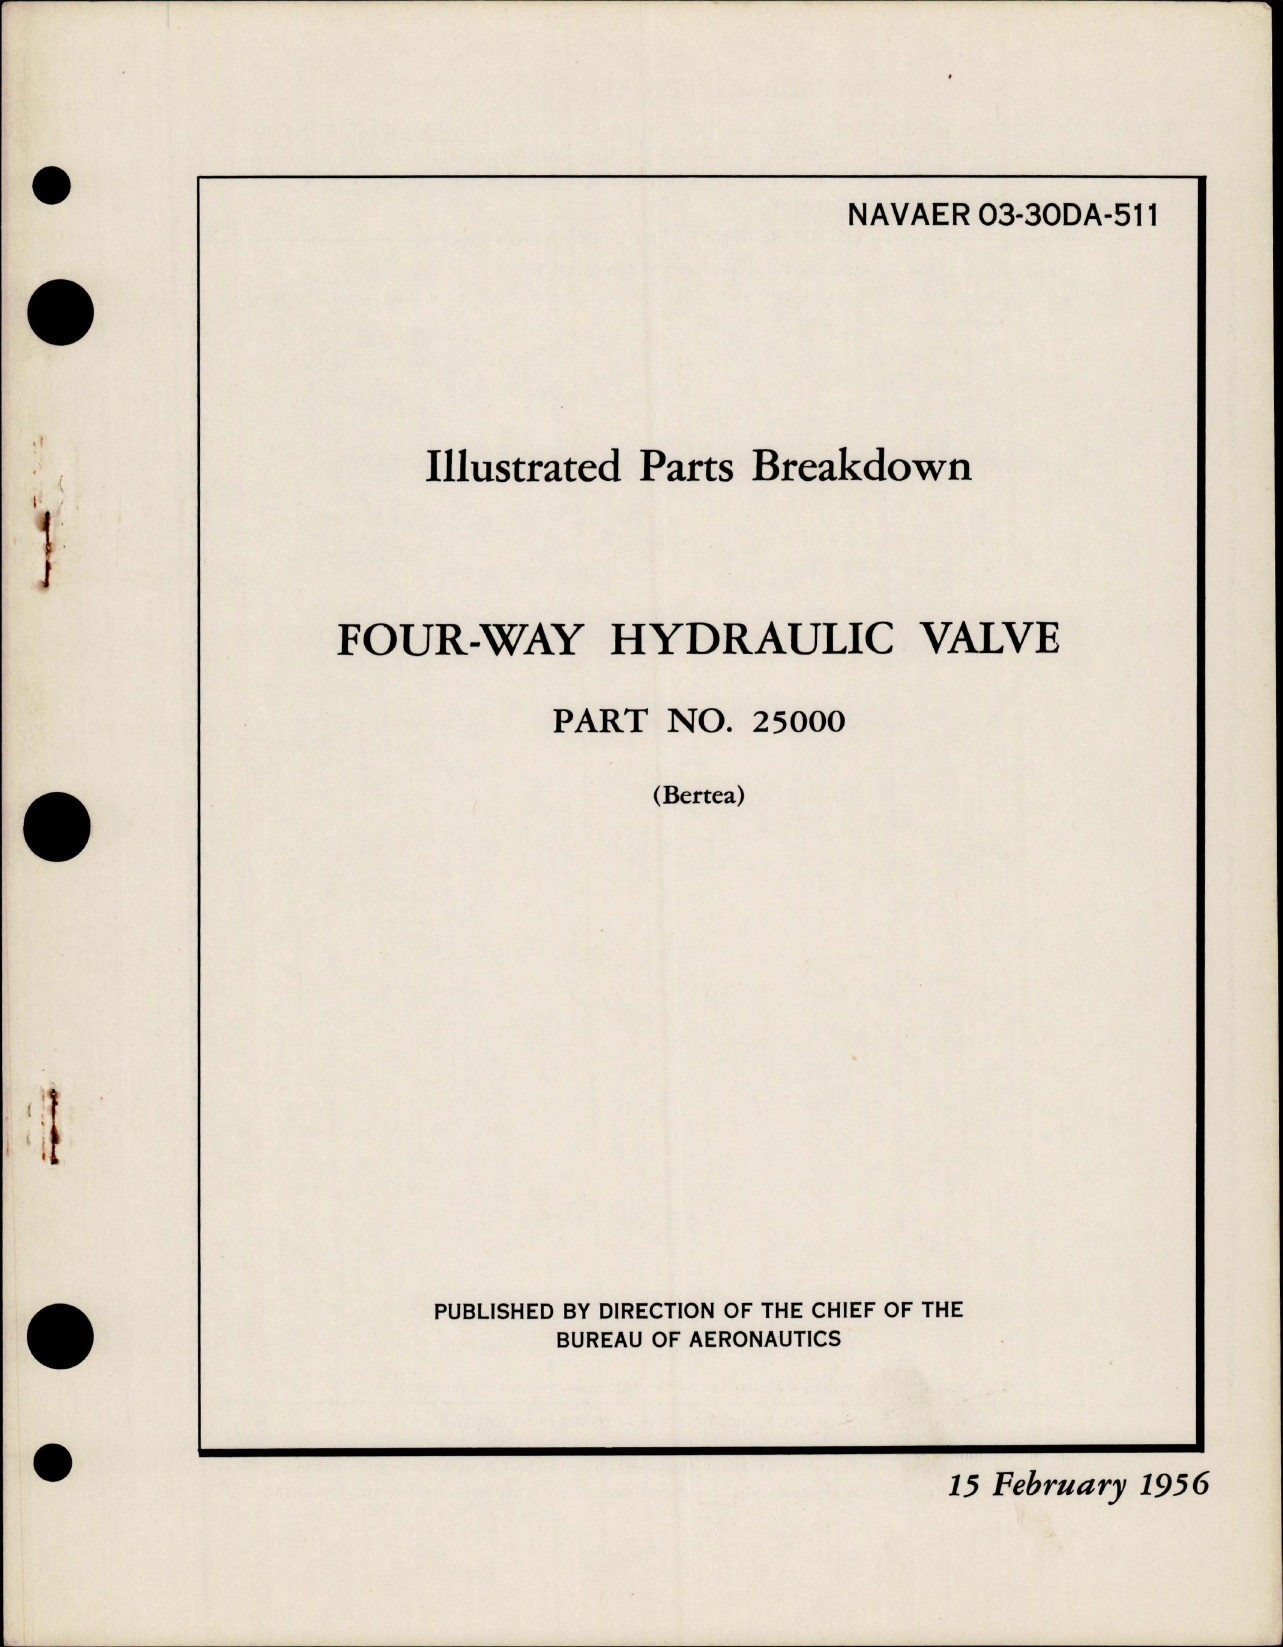 Sample page 1 from AirCorps Library document: Illustrated Parts Breakdown for Four-Way Hydraulic Valve - Part 25000